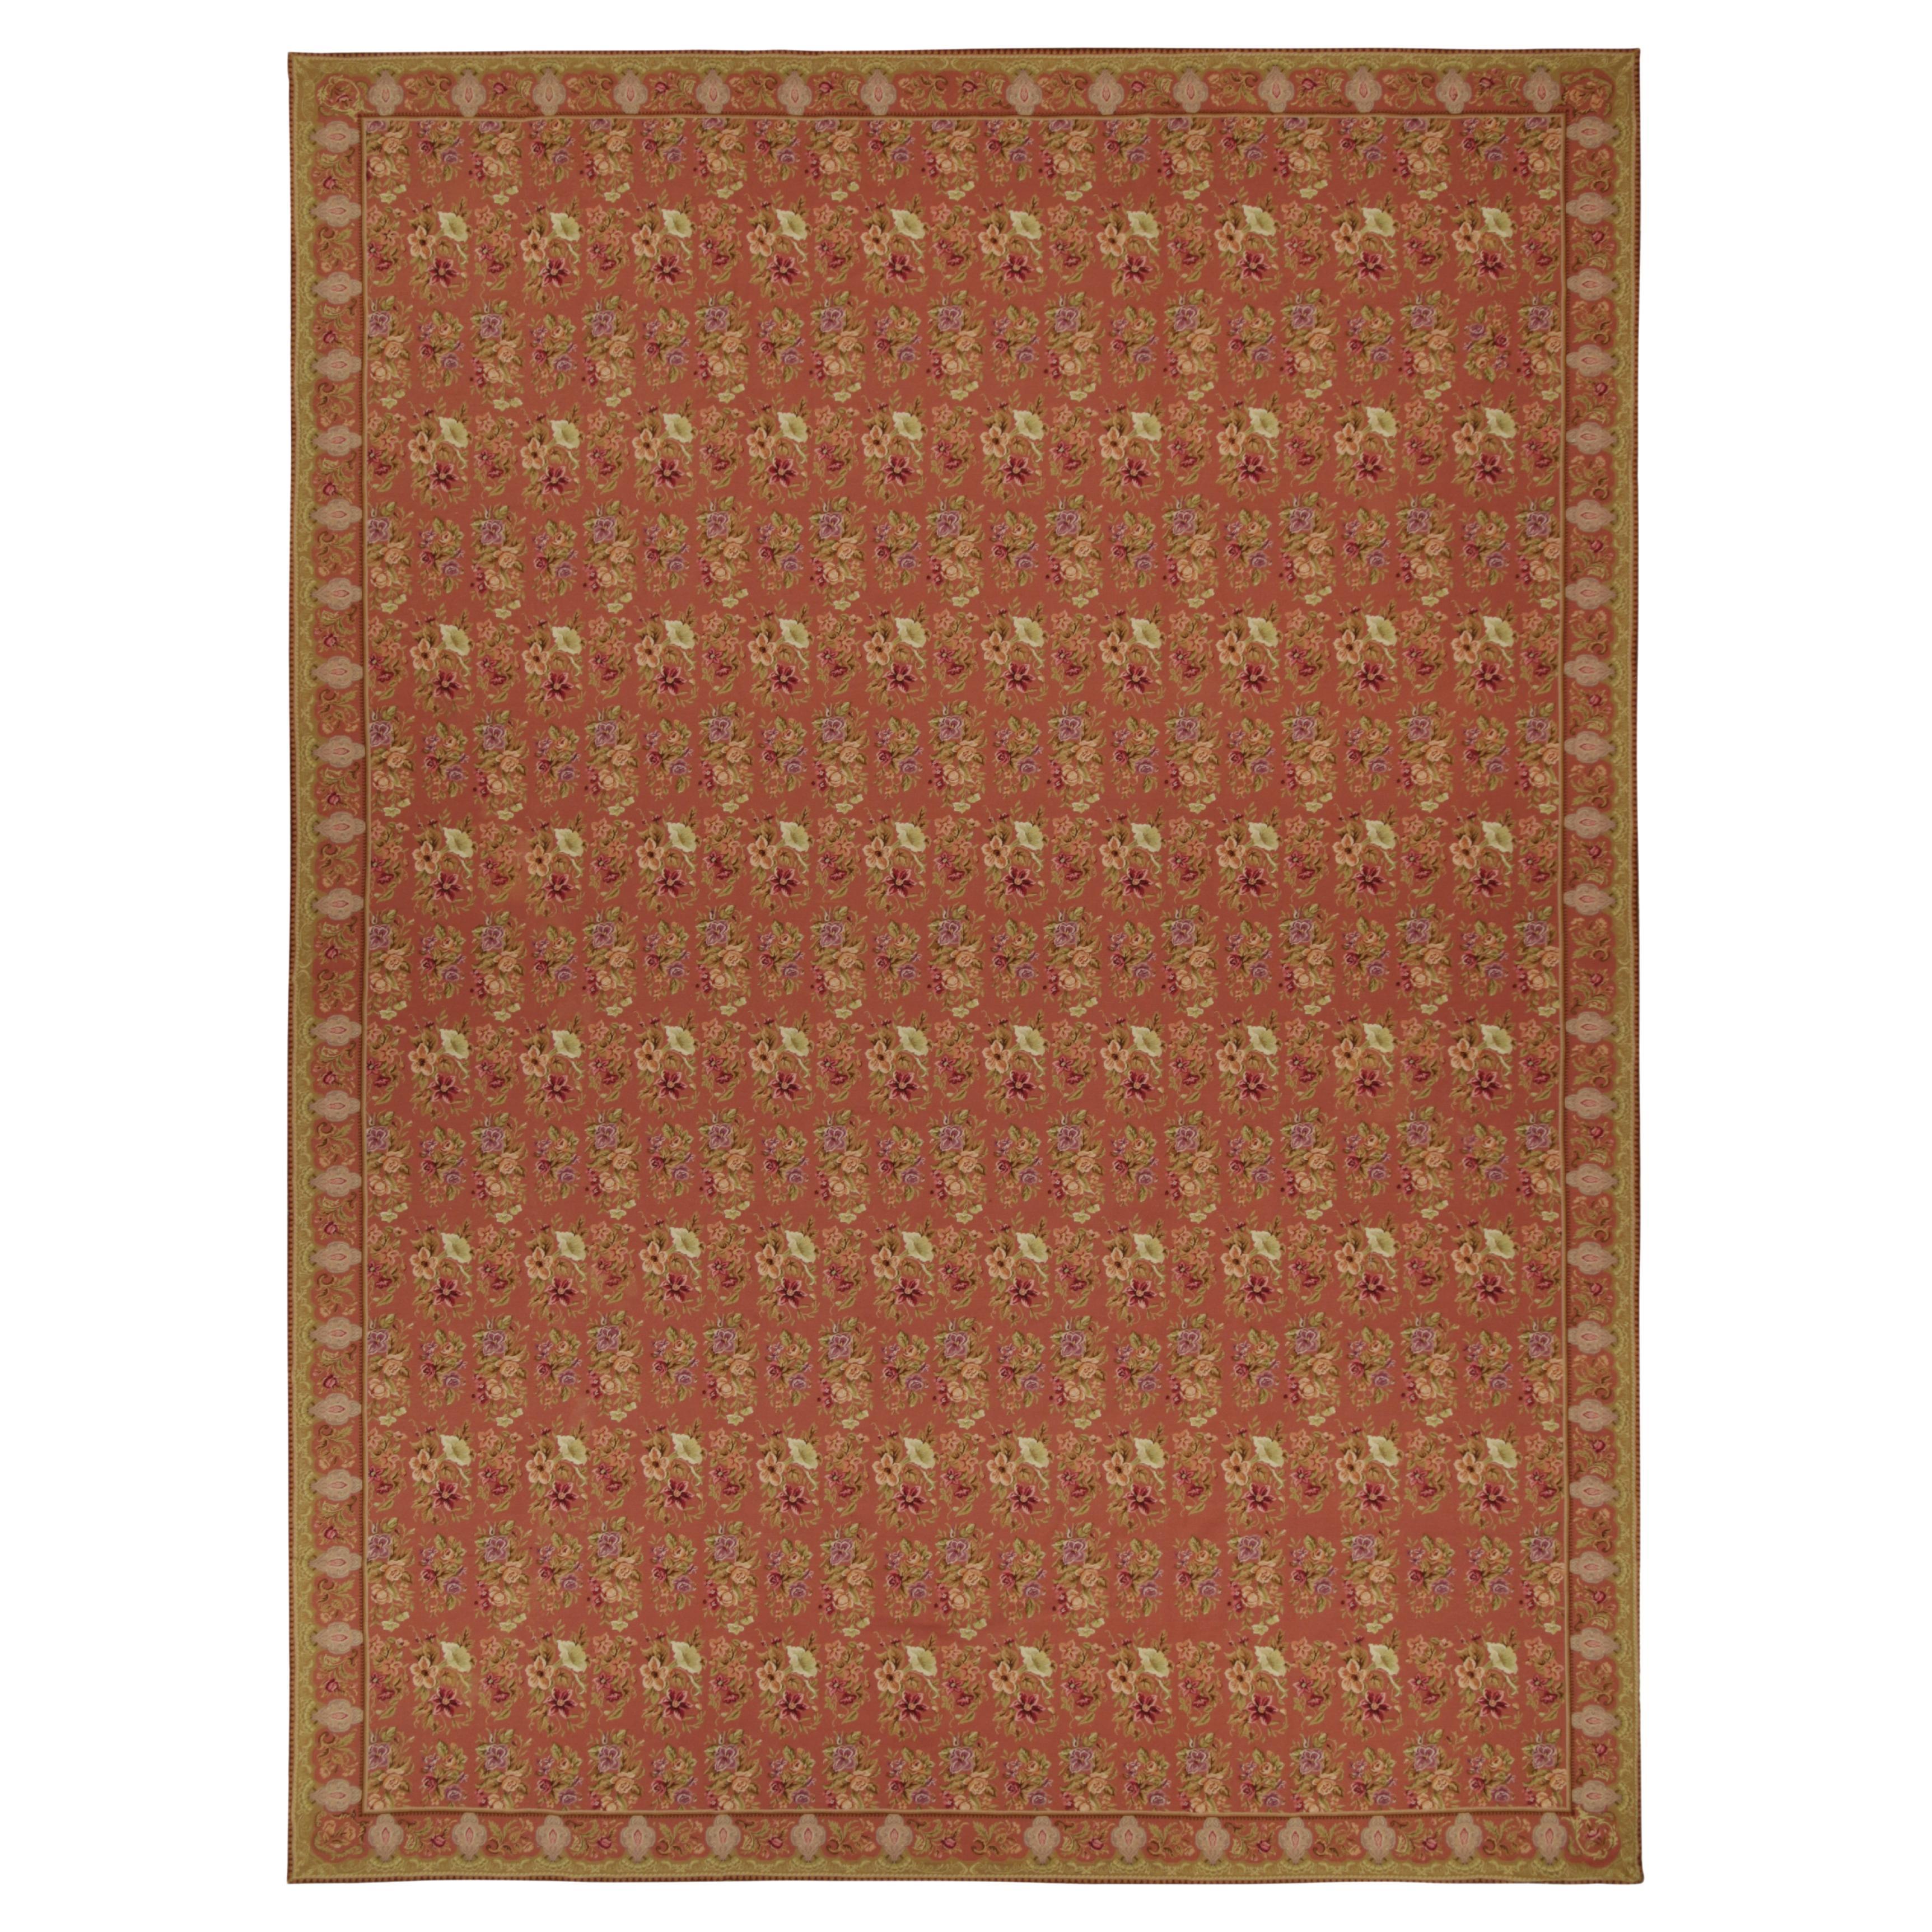 Vintage Needlepoint Rug in Red with Floral Patterns - by Rug & Kilim For Sale